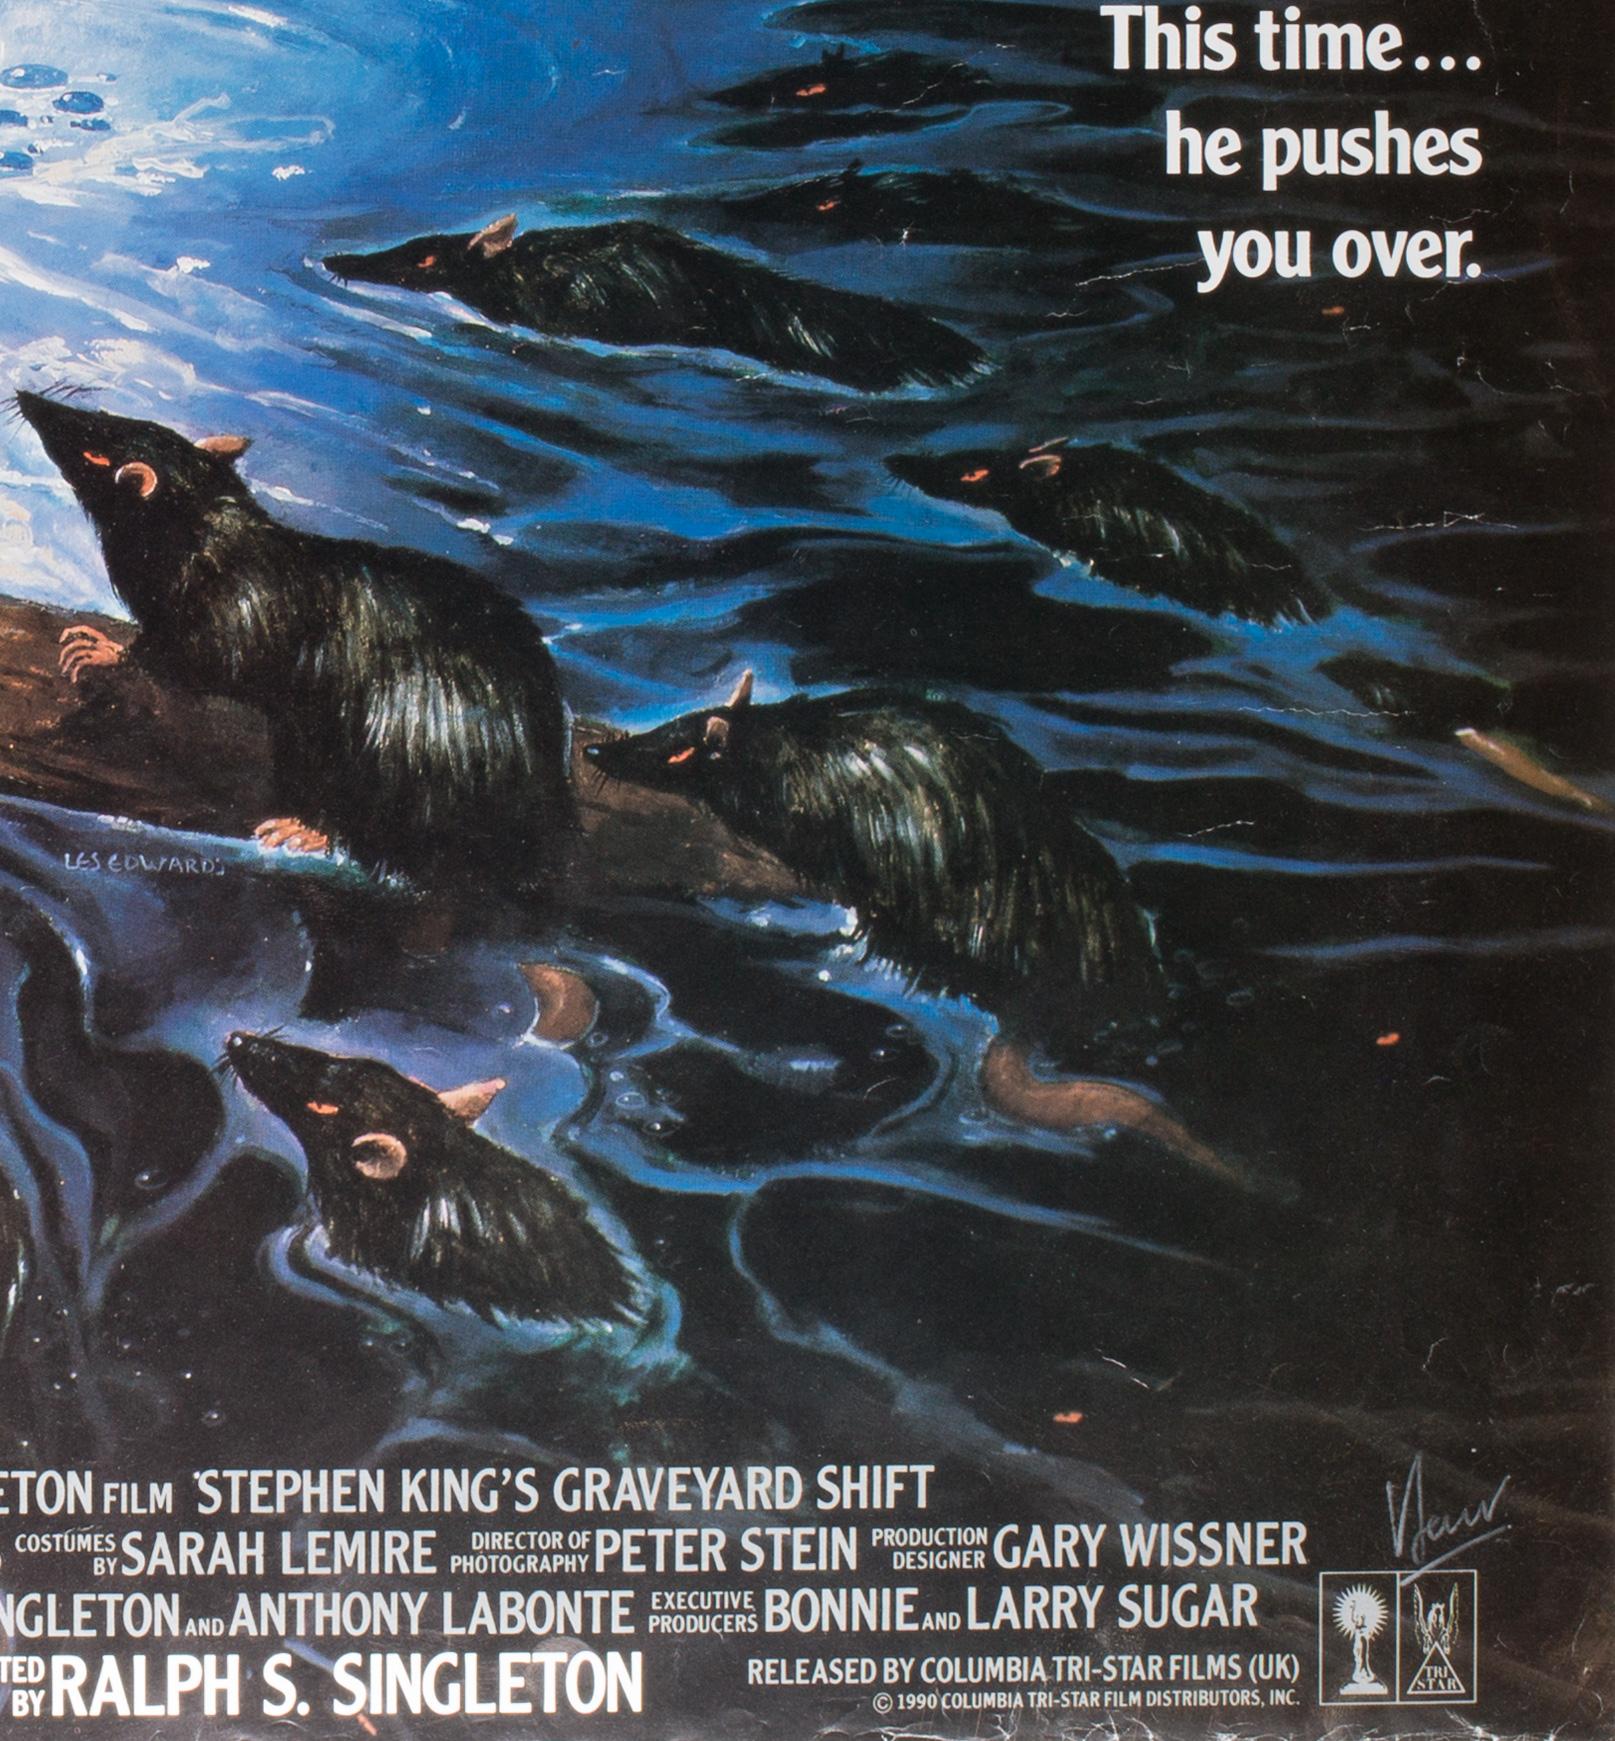 We love Vic Fair's design and Les Edwards’s illustration for Stephen King's film adaptation graveyard shift. What is especially fabulous is that it bears the signature of fair!

Interesting note, the head in the water is actually modeled on fellow